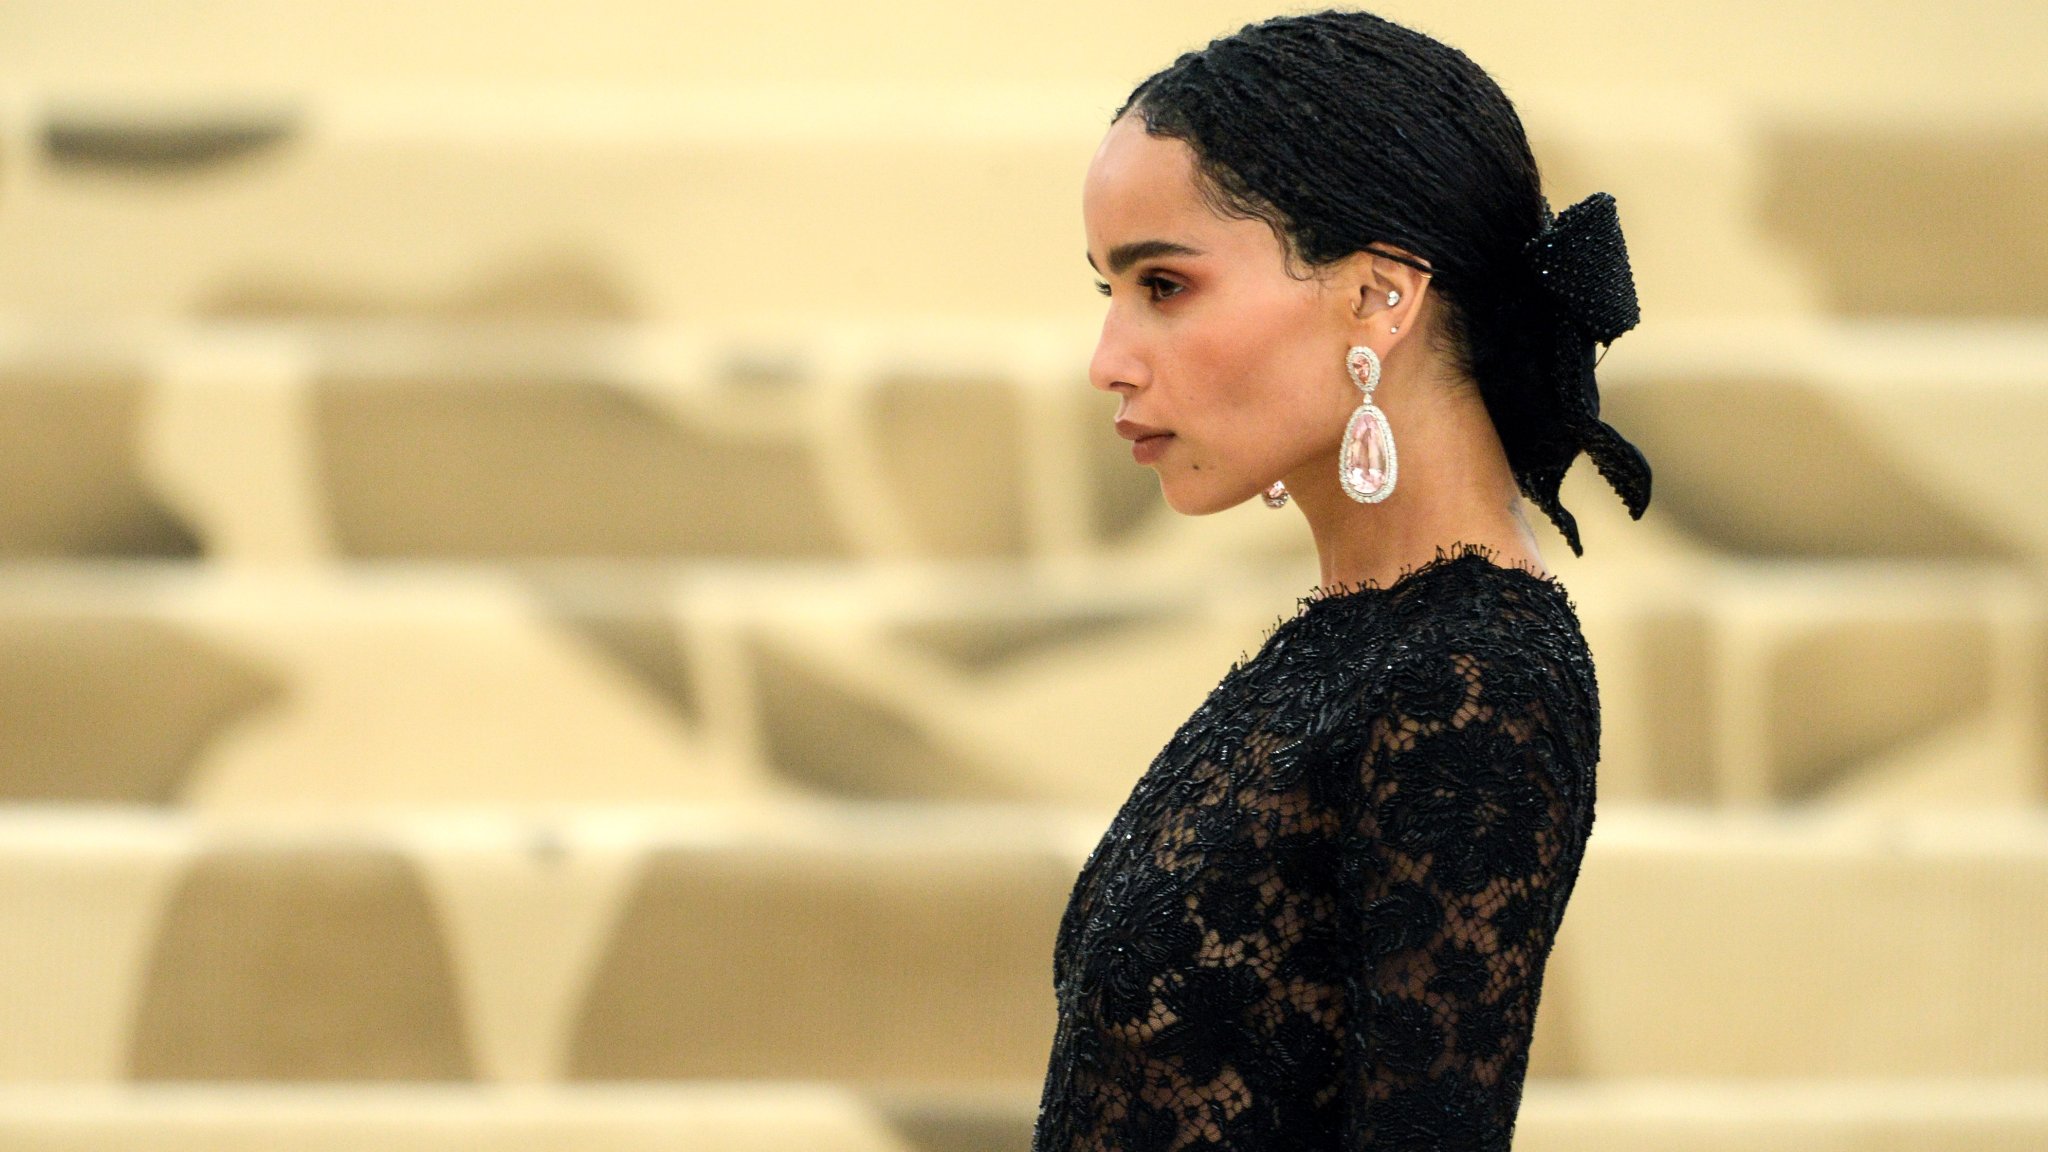 Update: Zoë Kravitz Is Still Being Cryptic Over A “Thing” On Instagram But We May Have An Answer